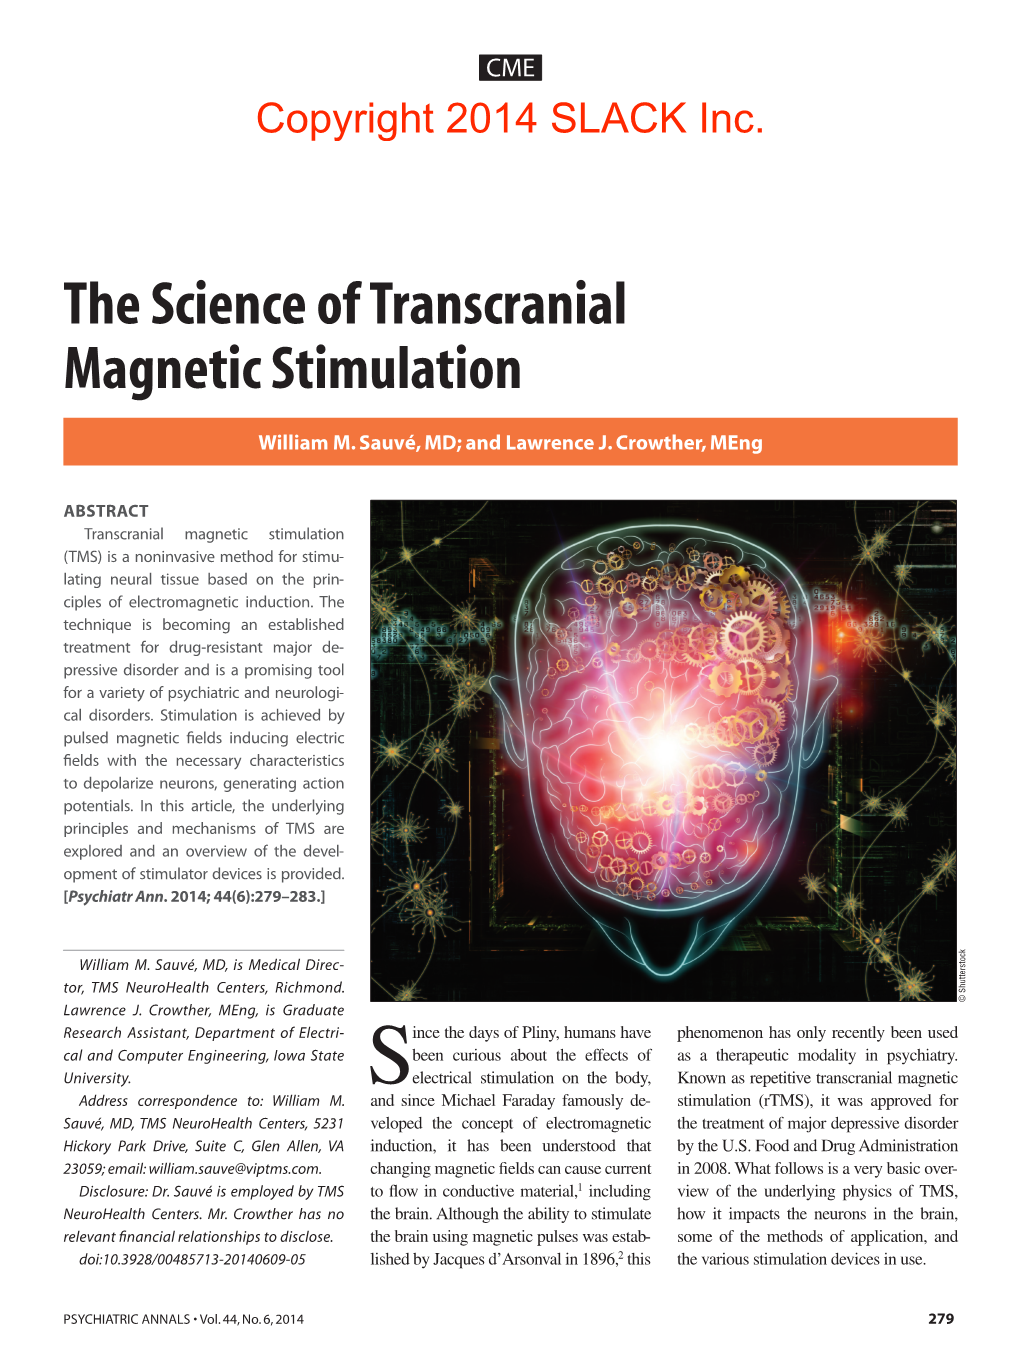 The Science of Transcranial Magnetic Stimulation